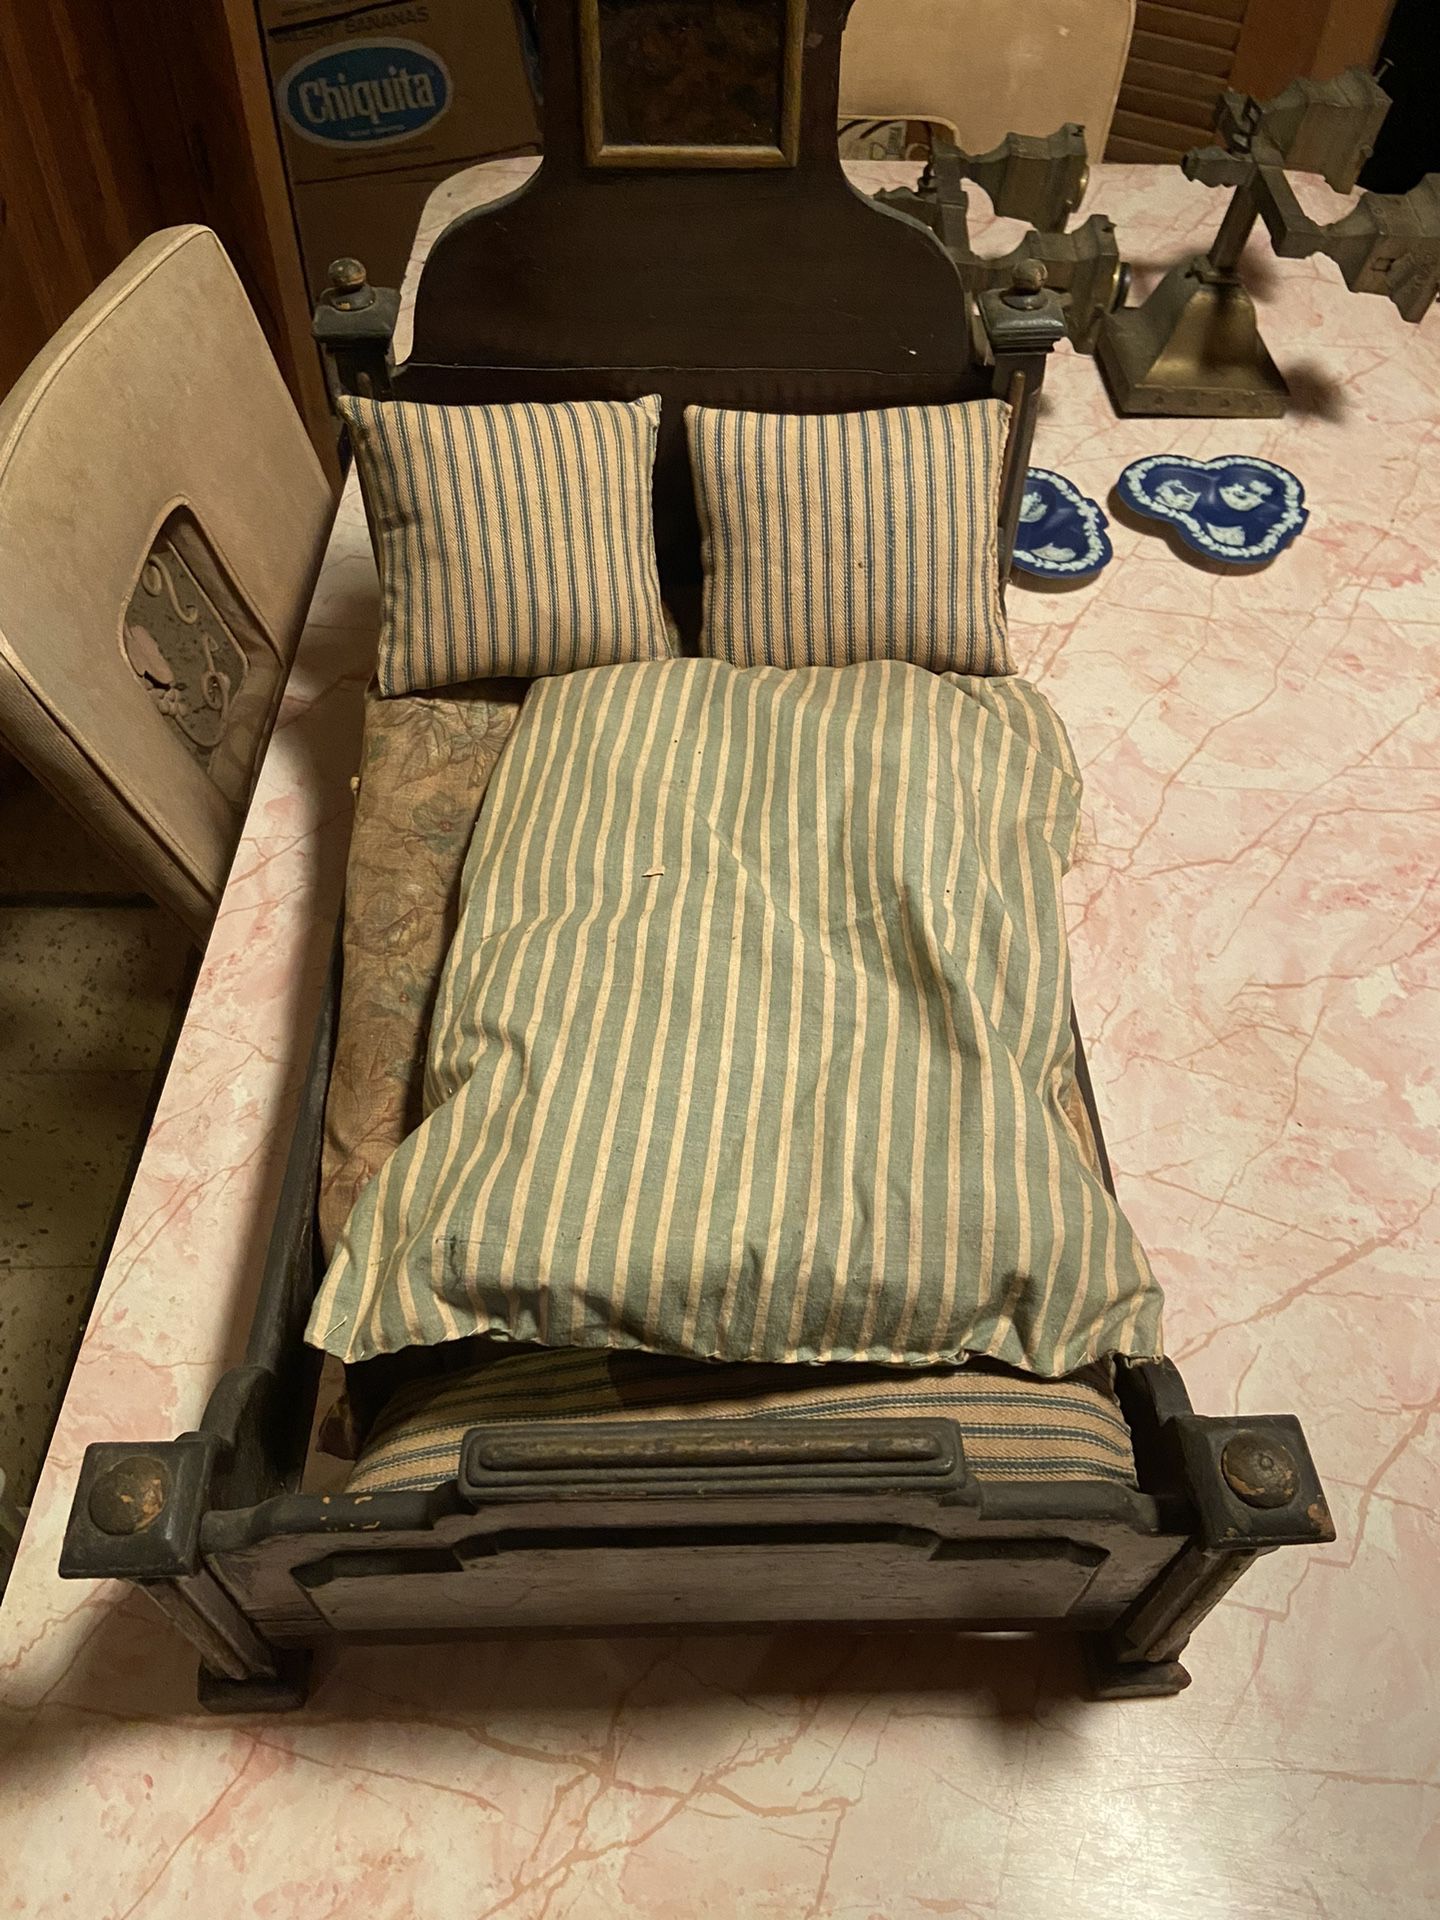 18” Antique Doll Bed